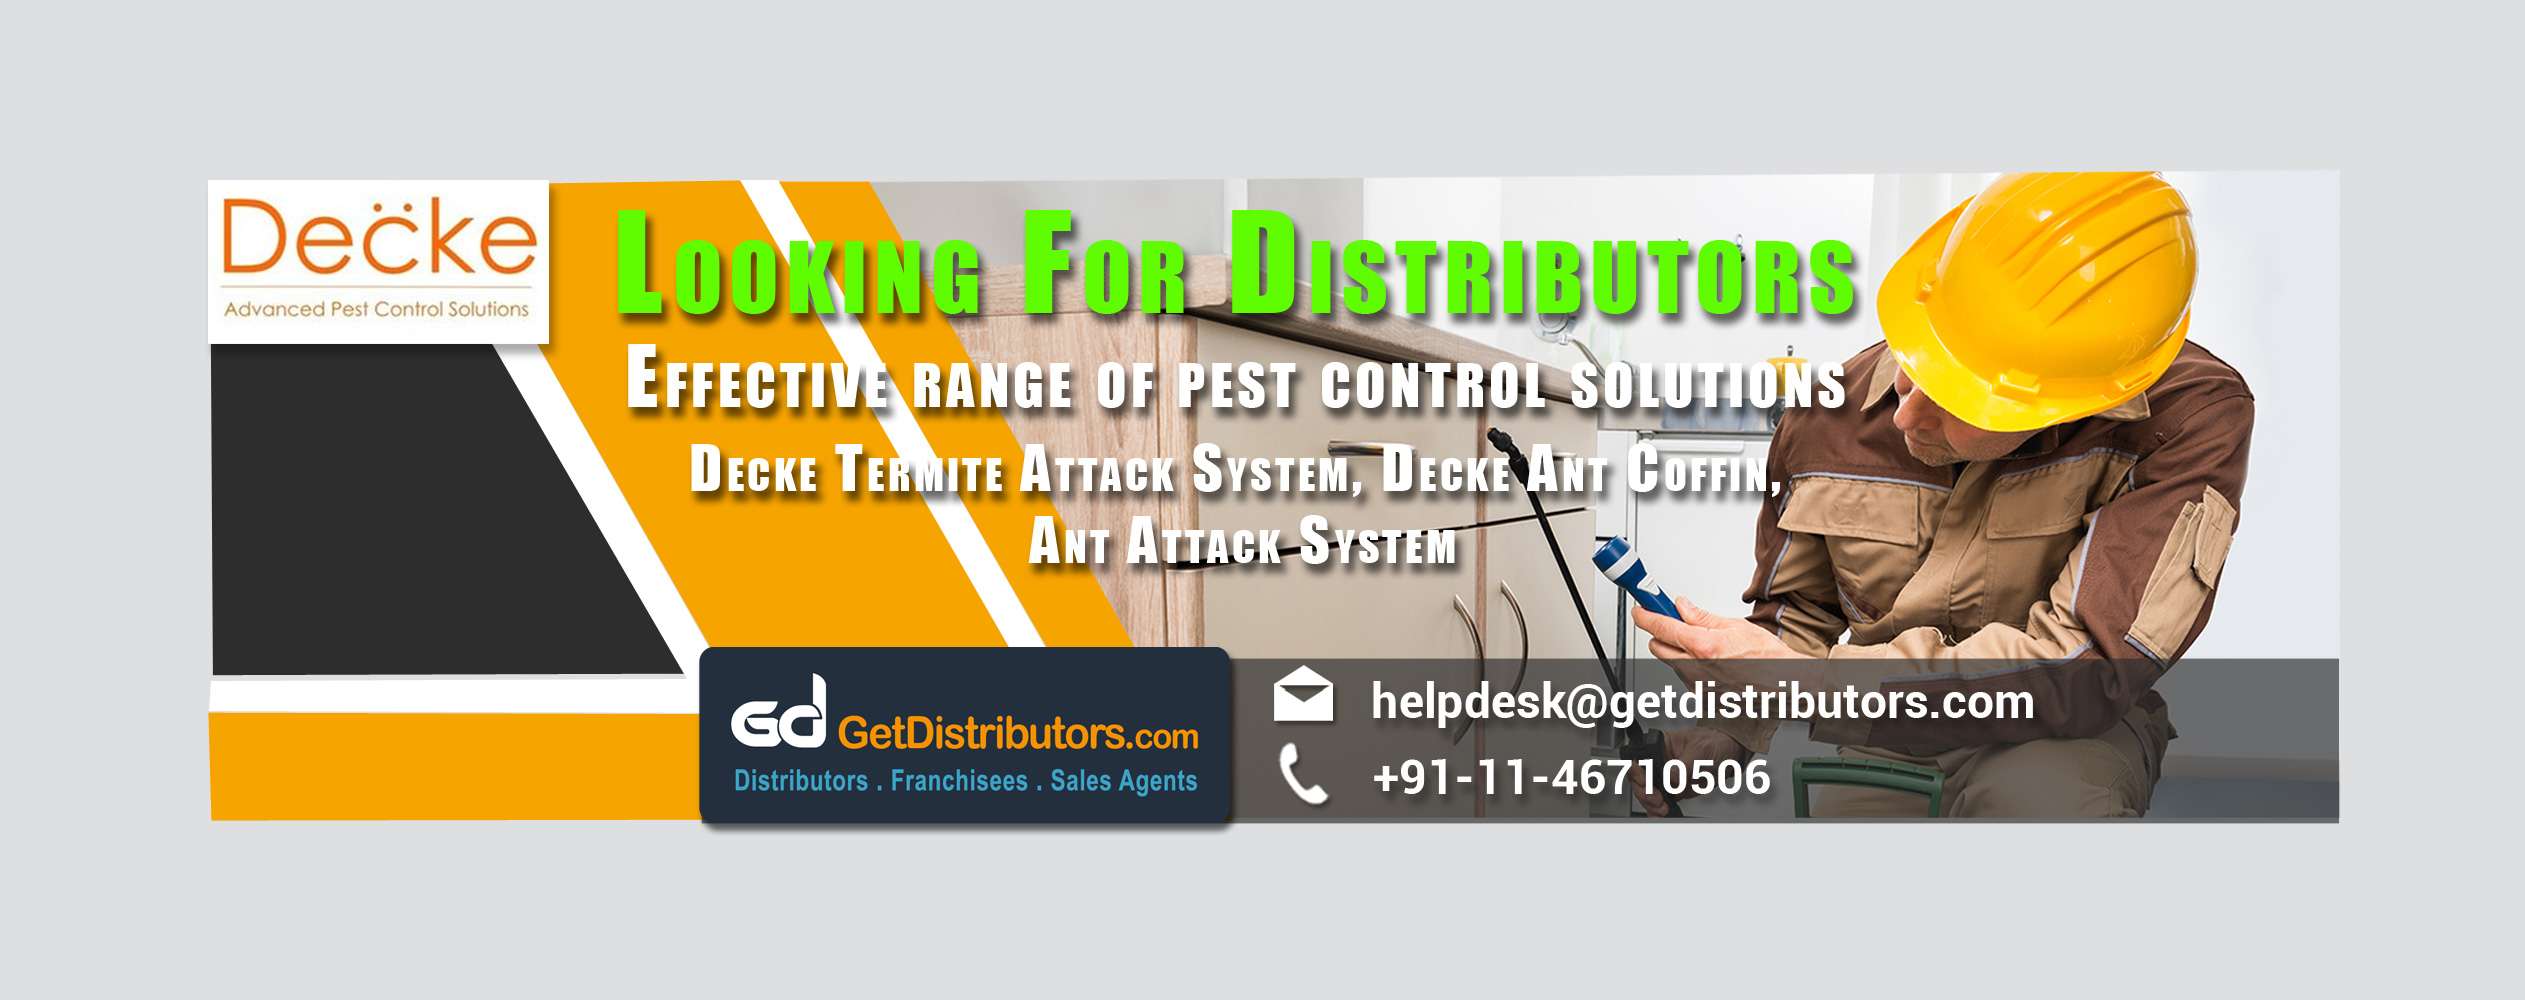 Decke Innovative Products Offering Effective Range of Pest Control Solutions